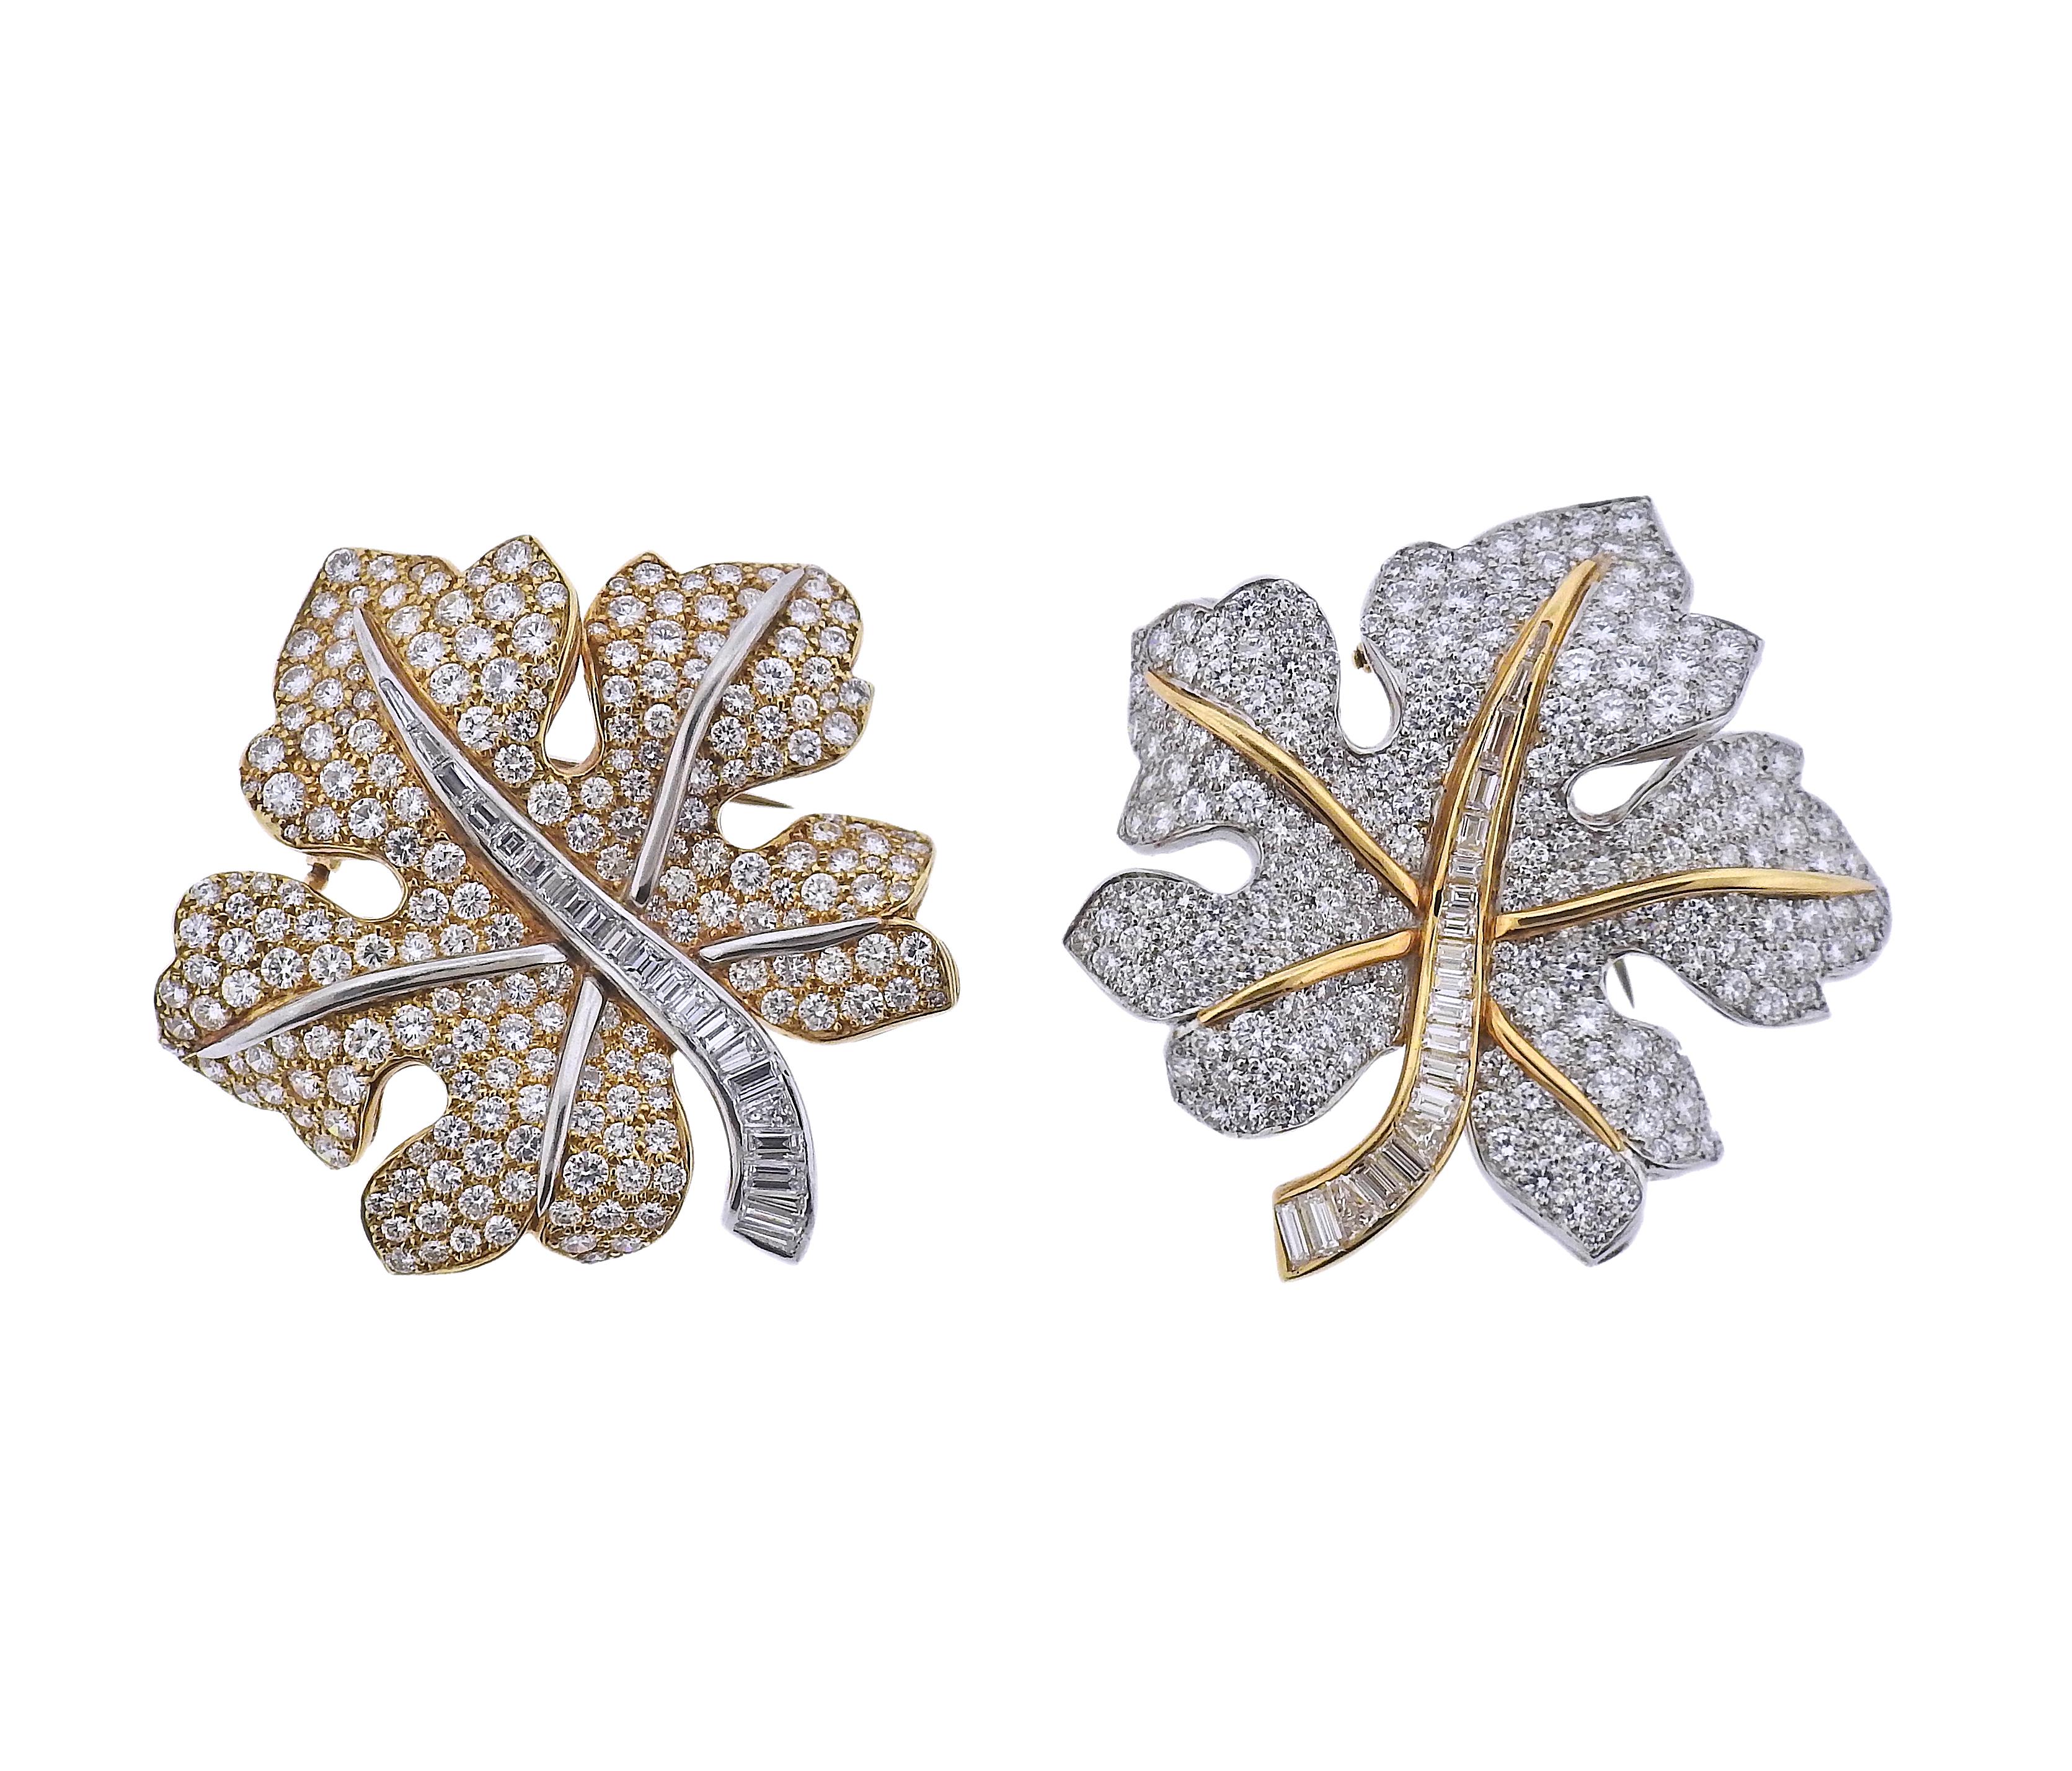 Set of two large leaf brooches, in 18k gold and platinum, set with a total of approx. 12 carats in diamonds. Brooches measure 2